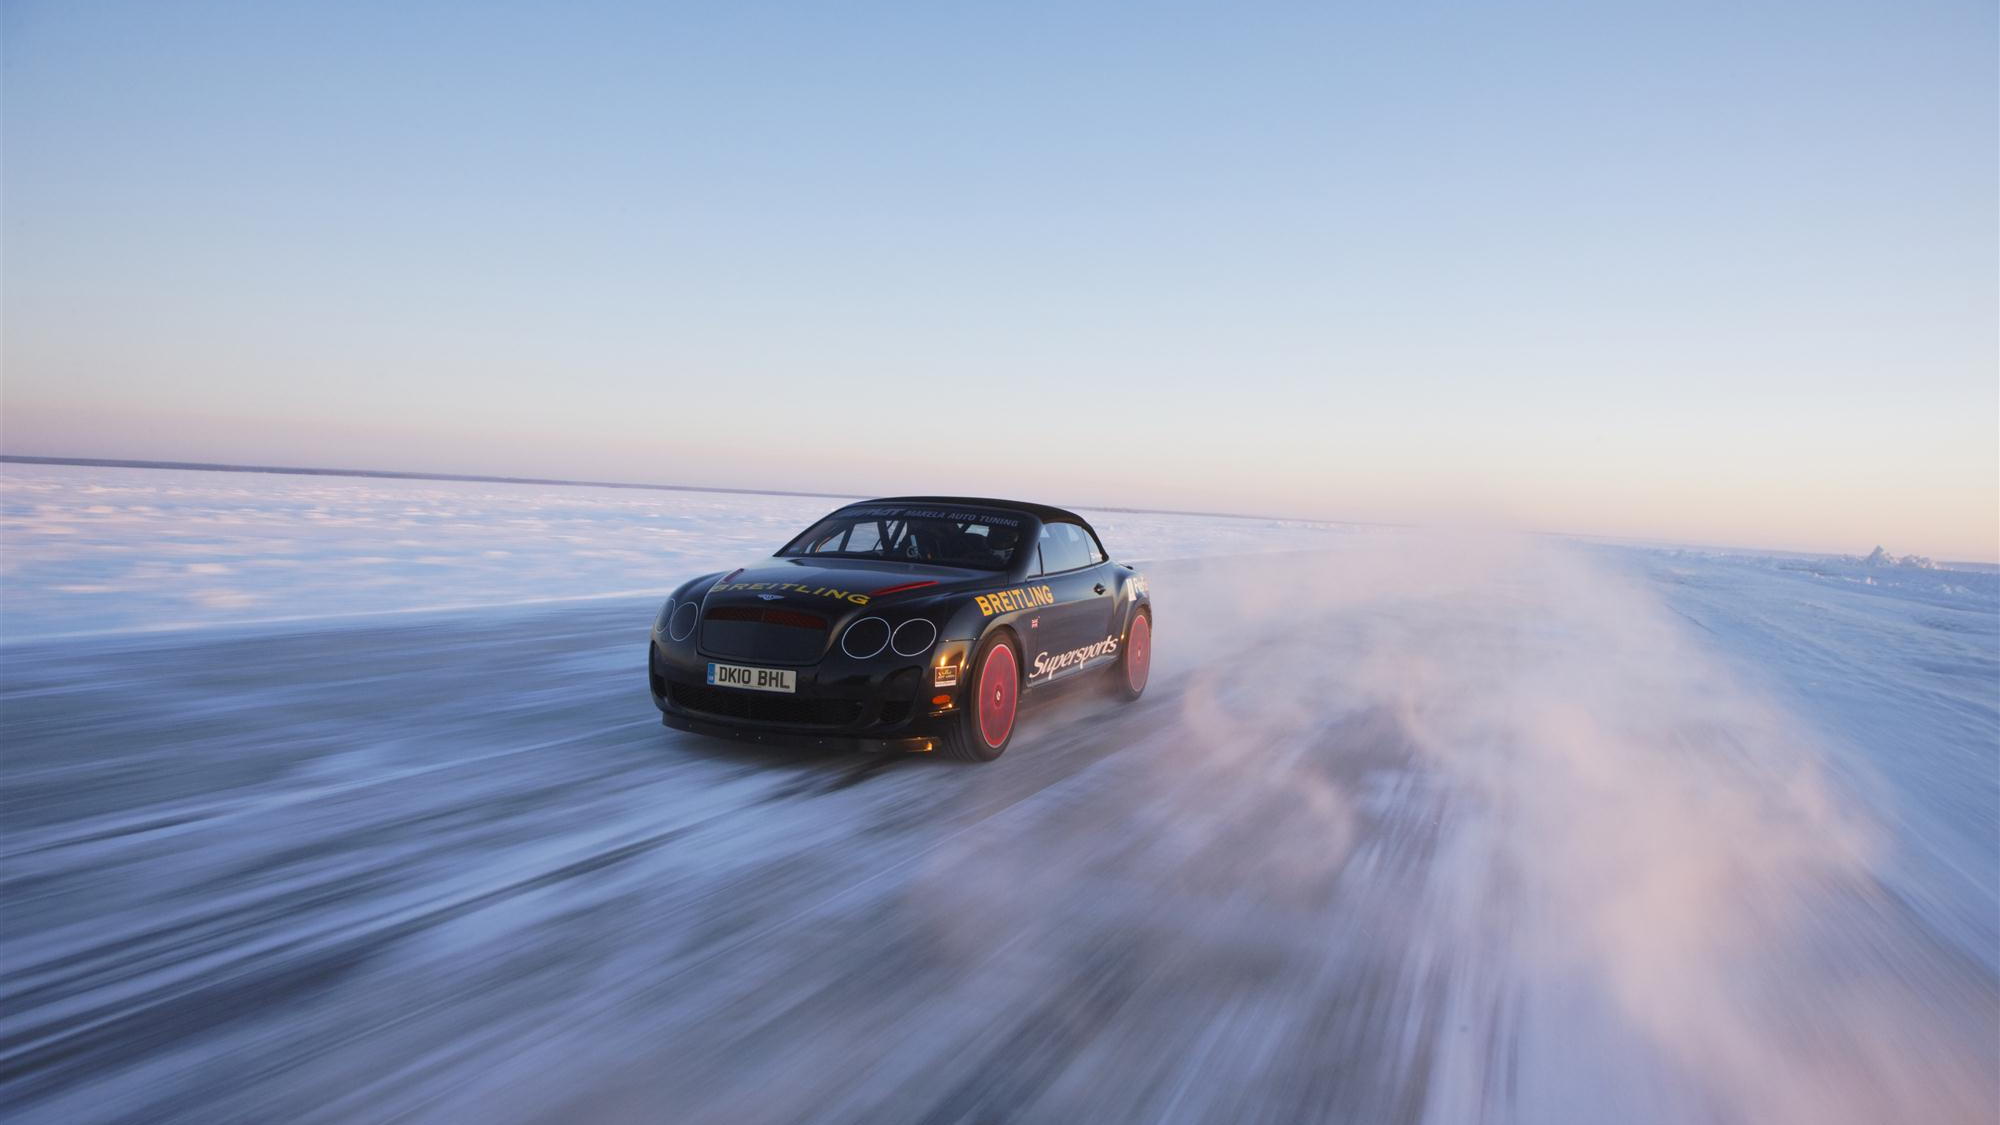 Bentley Continental Supersports sets ice speed record